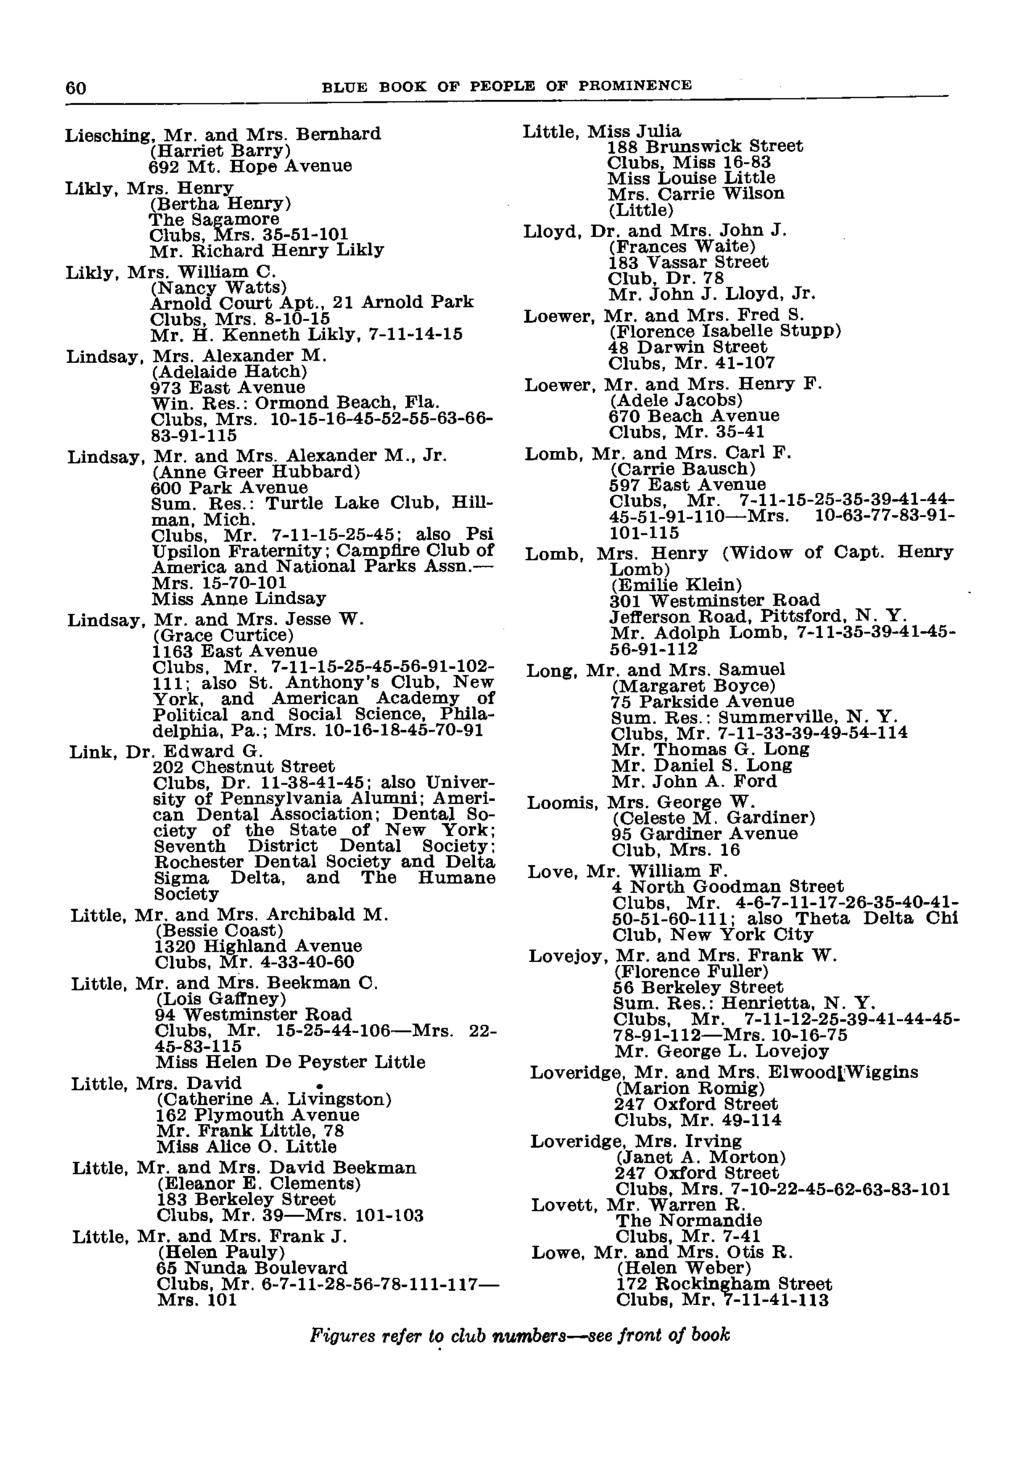 BLUE BOOK OF PEOPLE OF PROMINENCE Liesching, Mr. and Mrs. Bernhard (Harriet Barry) 692 Mt. Hope Avenue Likly, Mrs. Henry (Bertha Henry) The Sagamore Clubs, Mrs. 35-51-101 Mr.